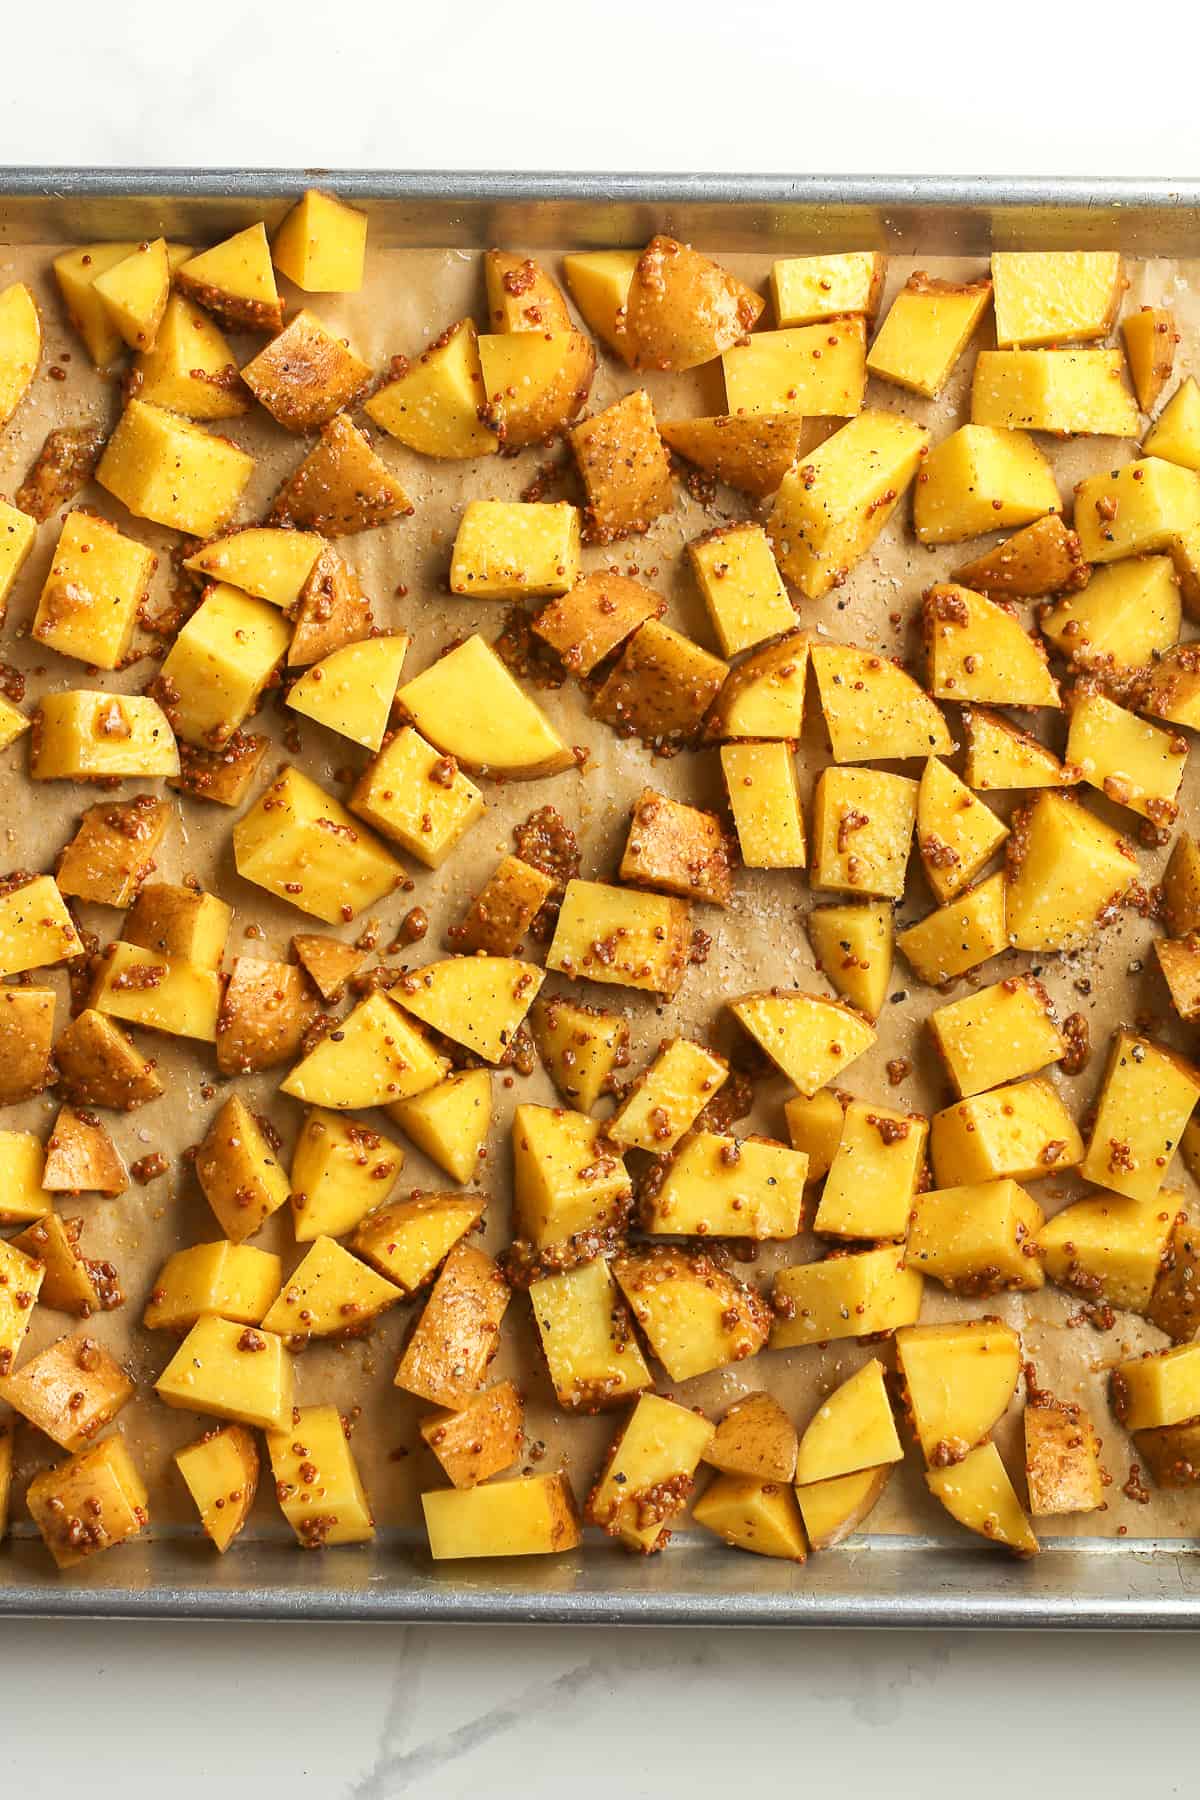 A pan of the chopped yellow potatoes with toppings before roasting.